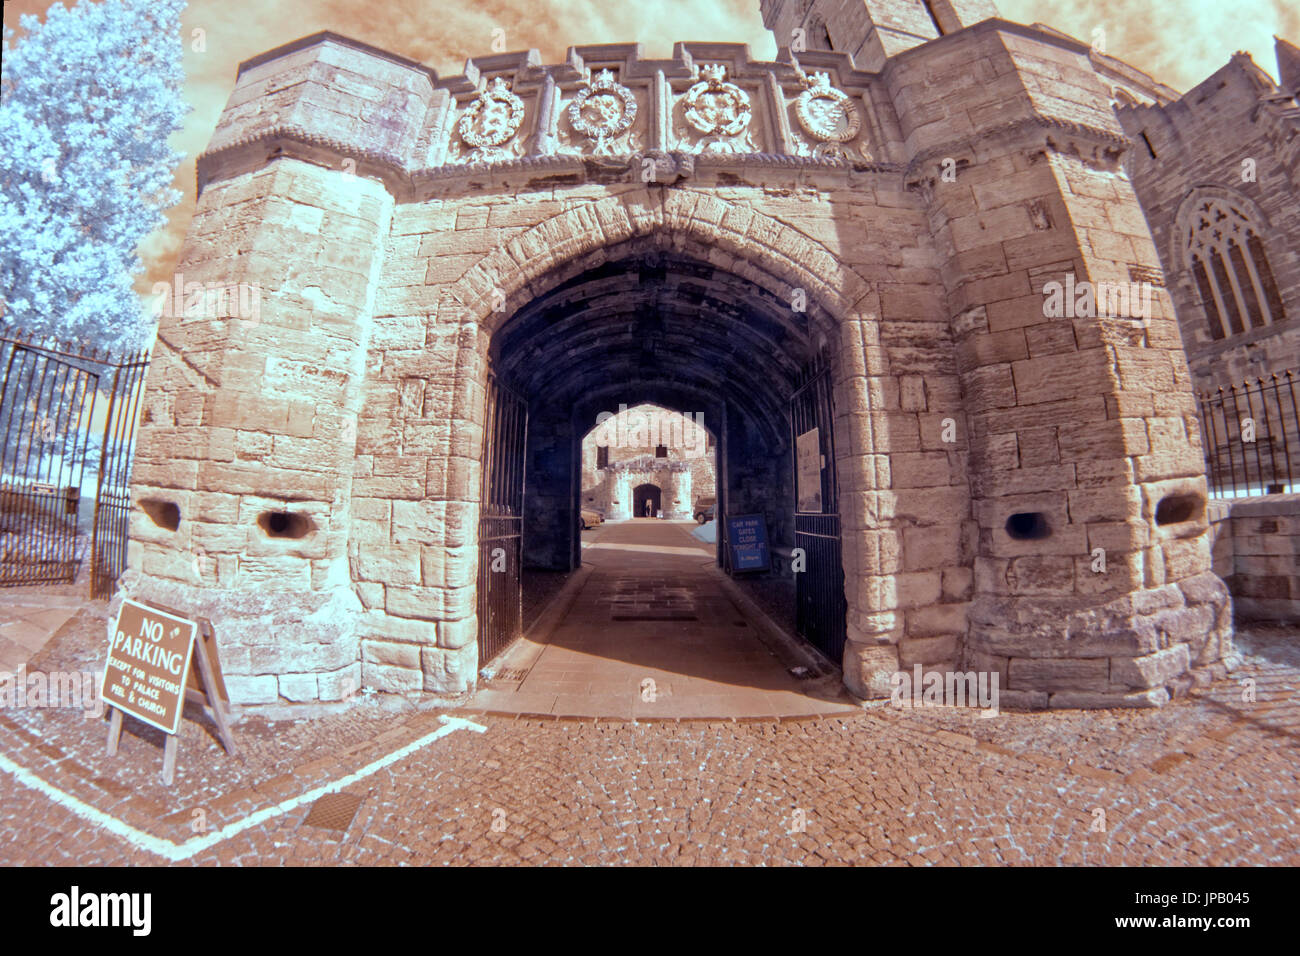 Linlithgow Palace, Kirkgate, Linlithgow, Geburtsort von Mary Queen of scots Stockfoto